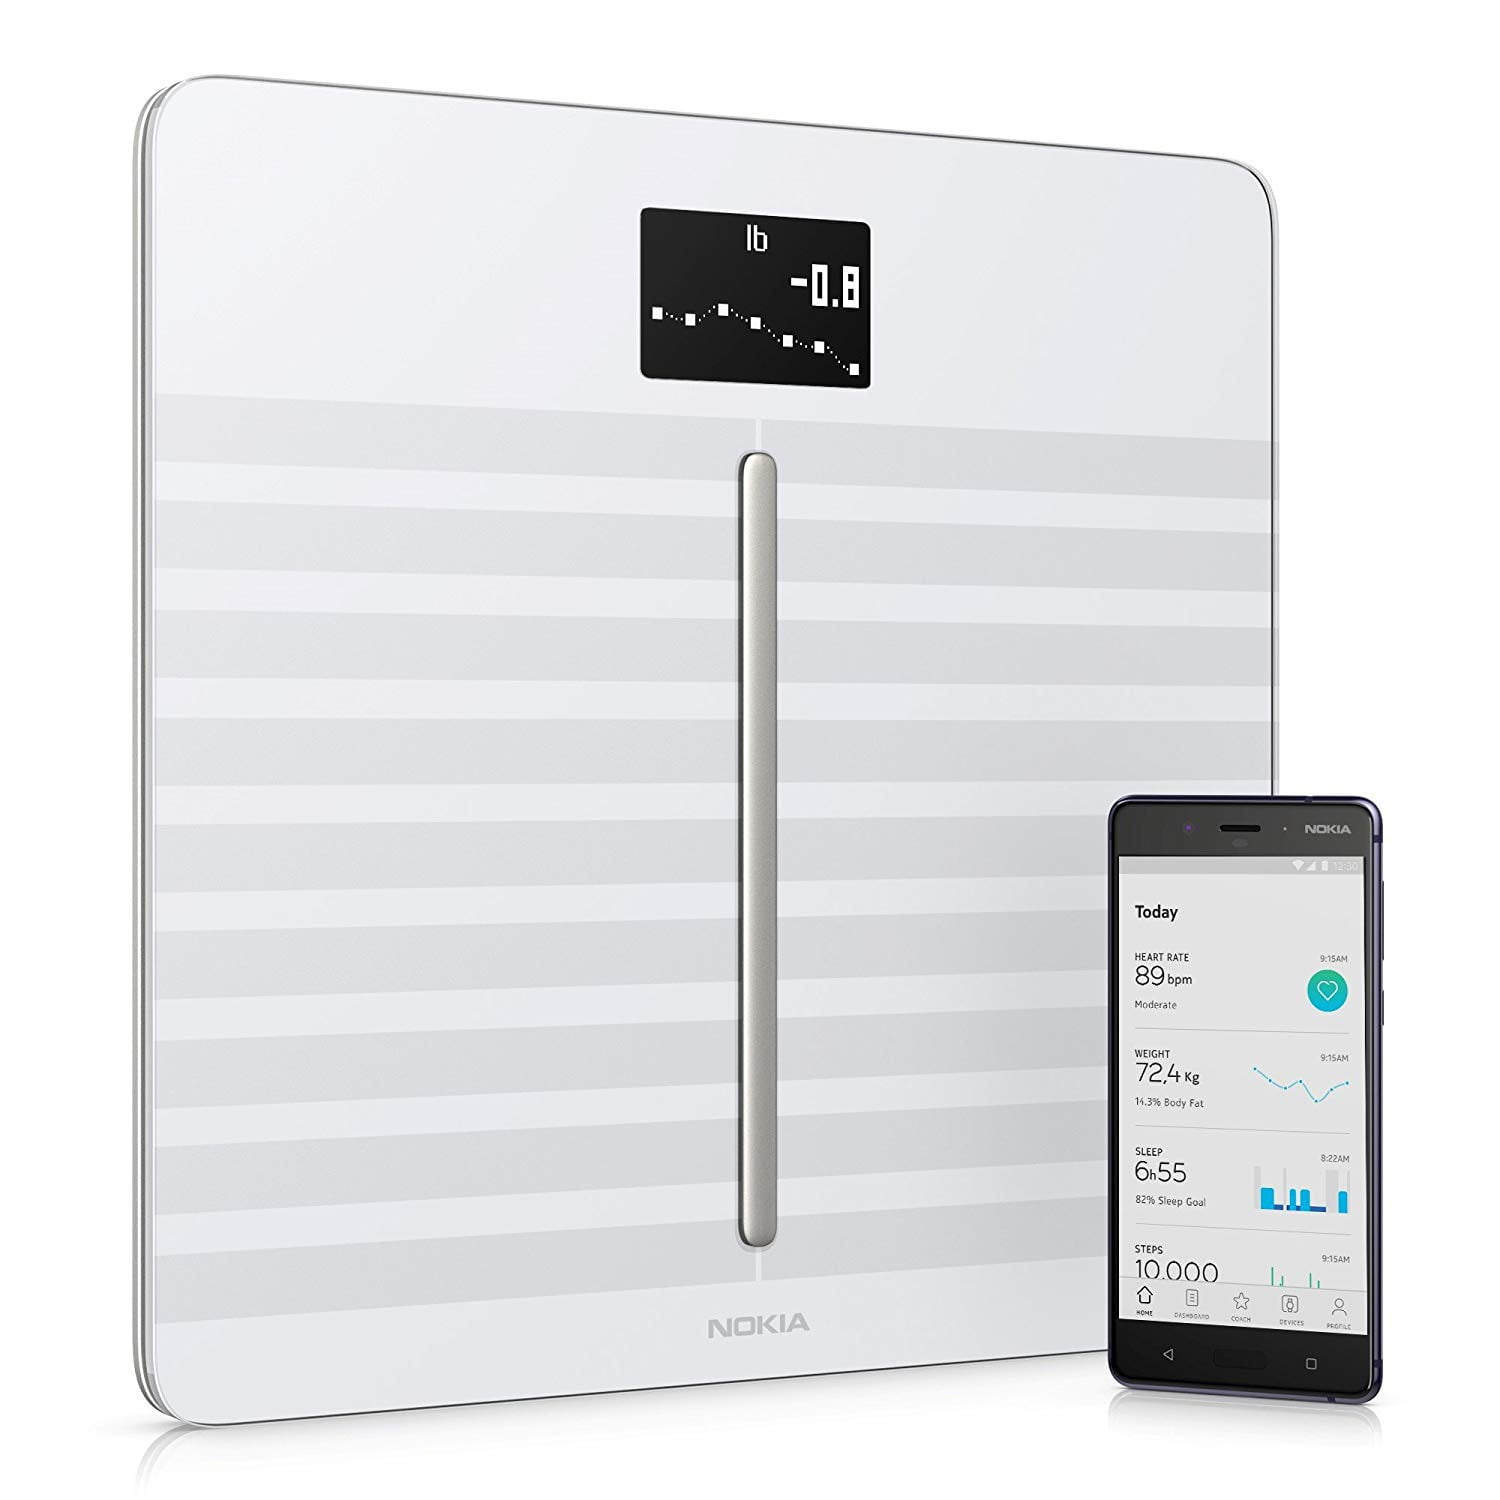 Withings Body Cardio Scale Helps You Work Towards Your Health Goals